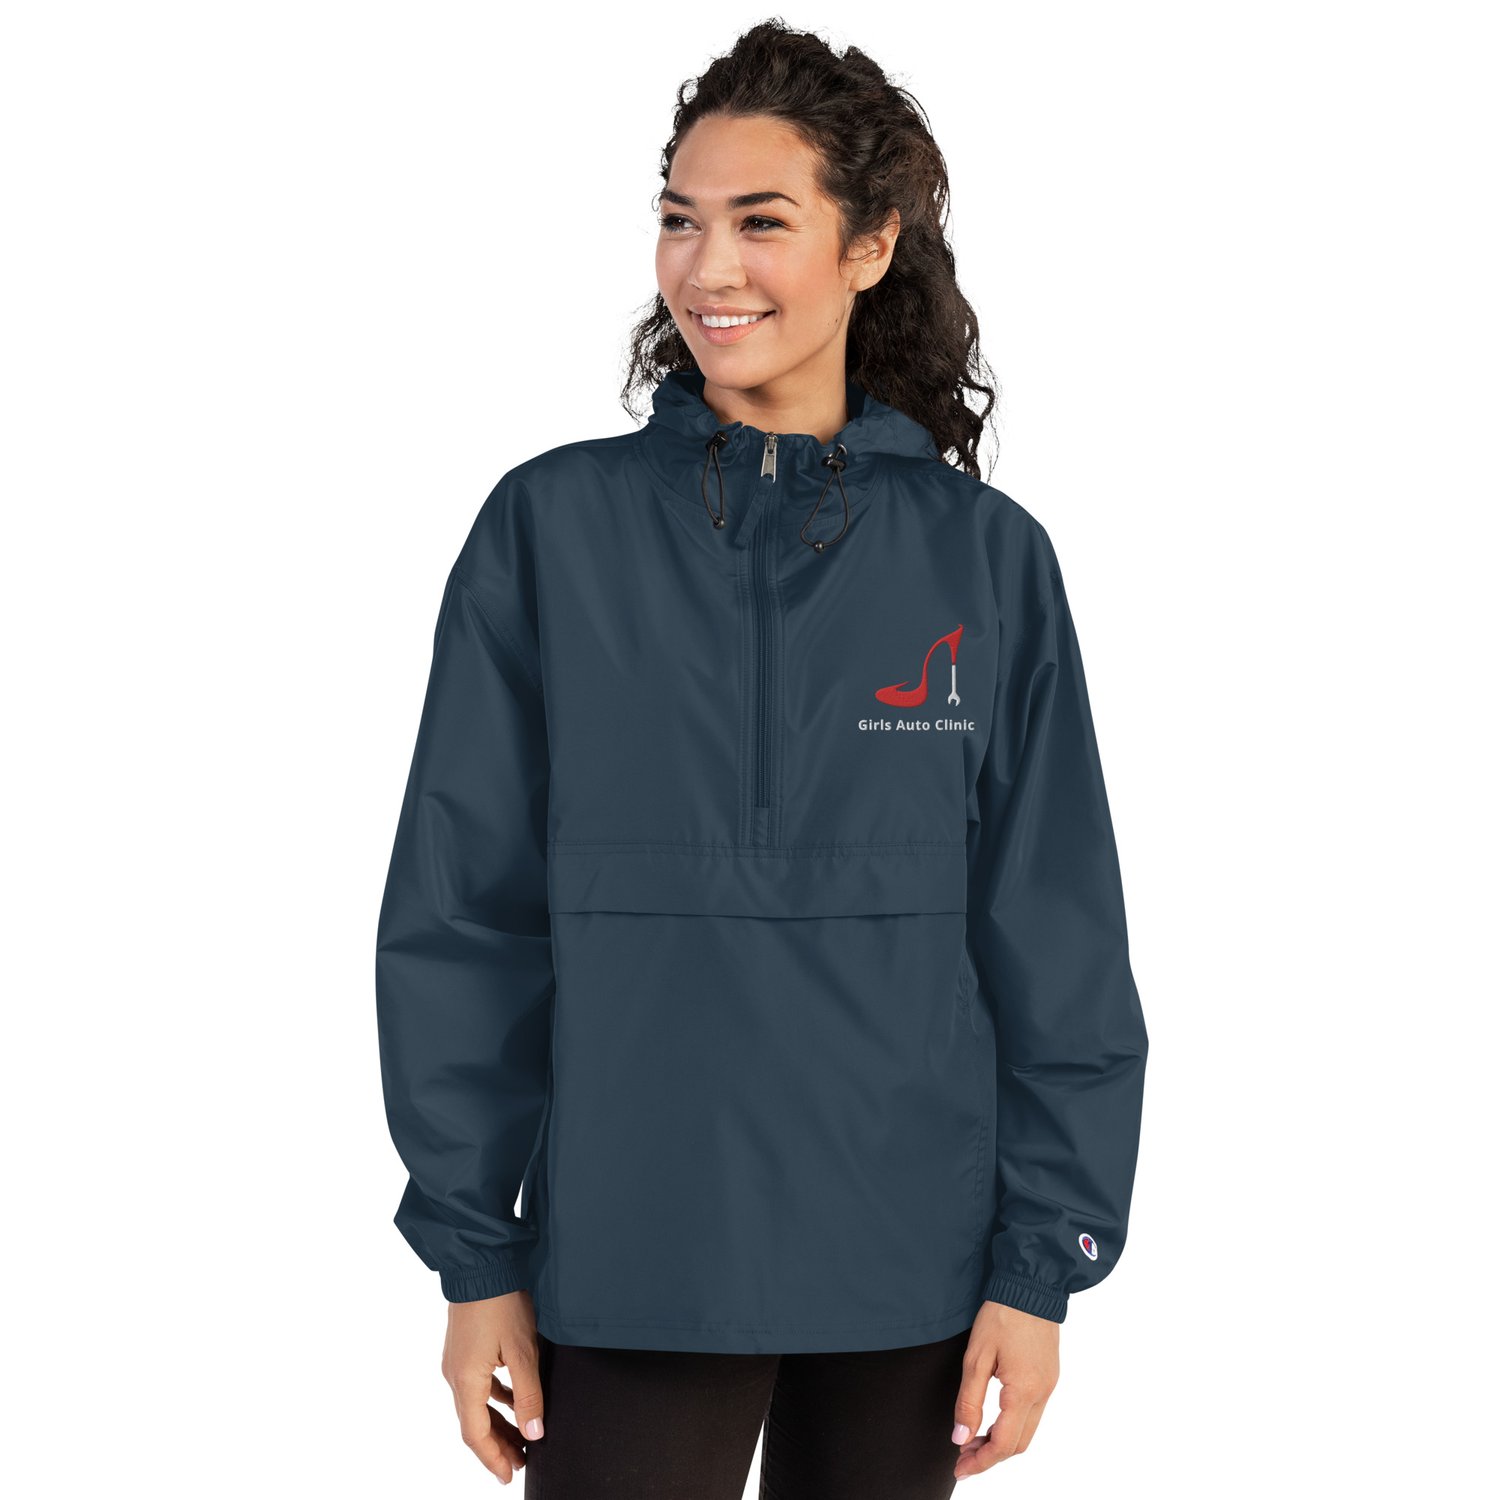 Girls Auto Clinic Champion Packable Jacket Red/White — Girls Auto Clinic